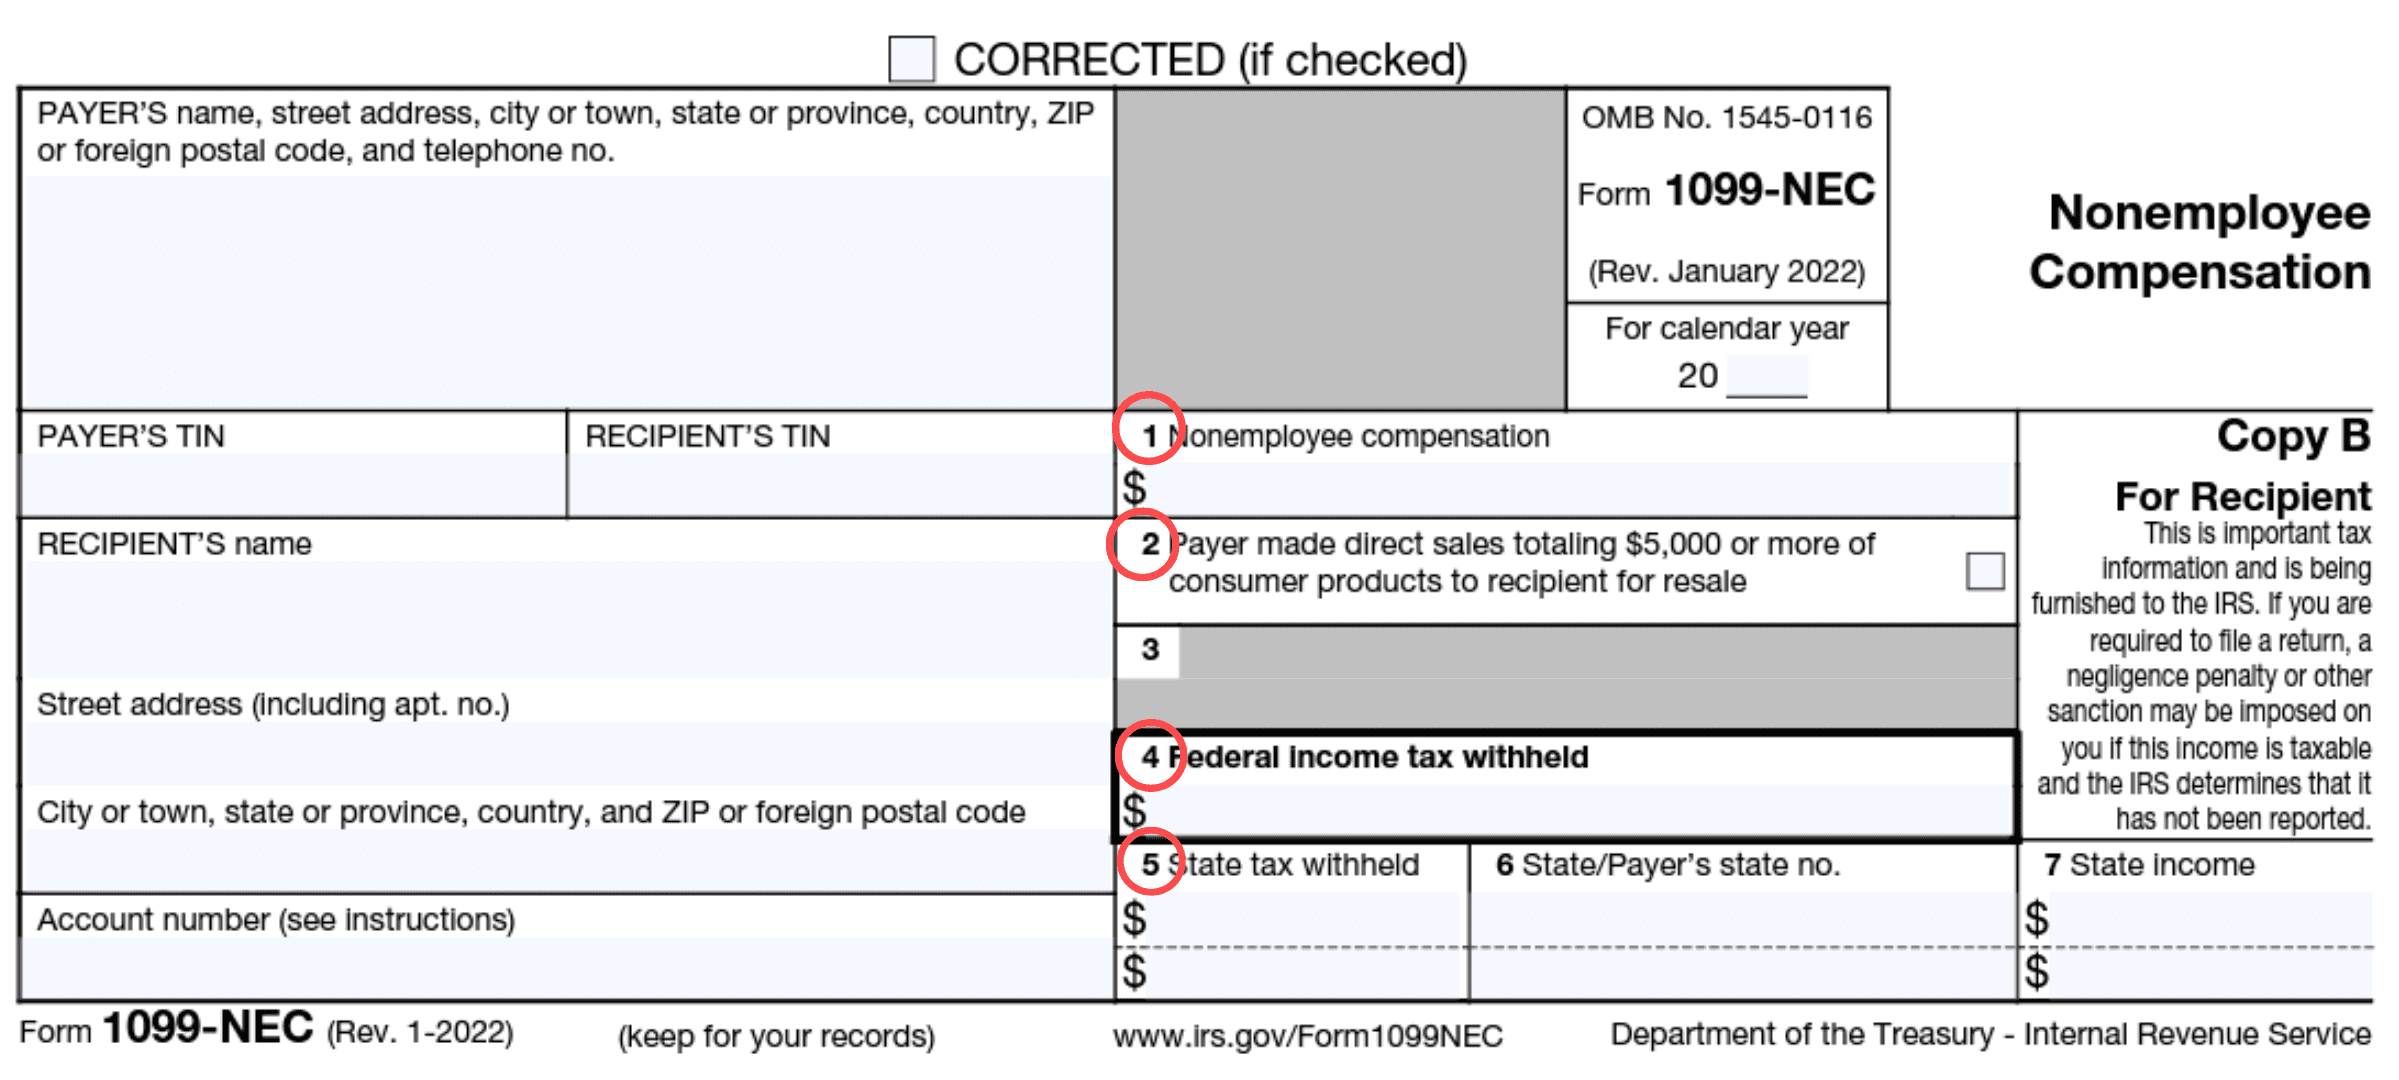 Image of Form 1099-NEC for reporting nonemployee compensation to the IRS. Includes payer and recipient information, taxes withheld, and account number.